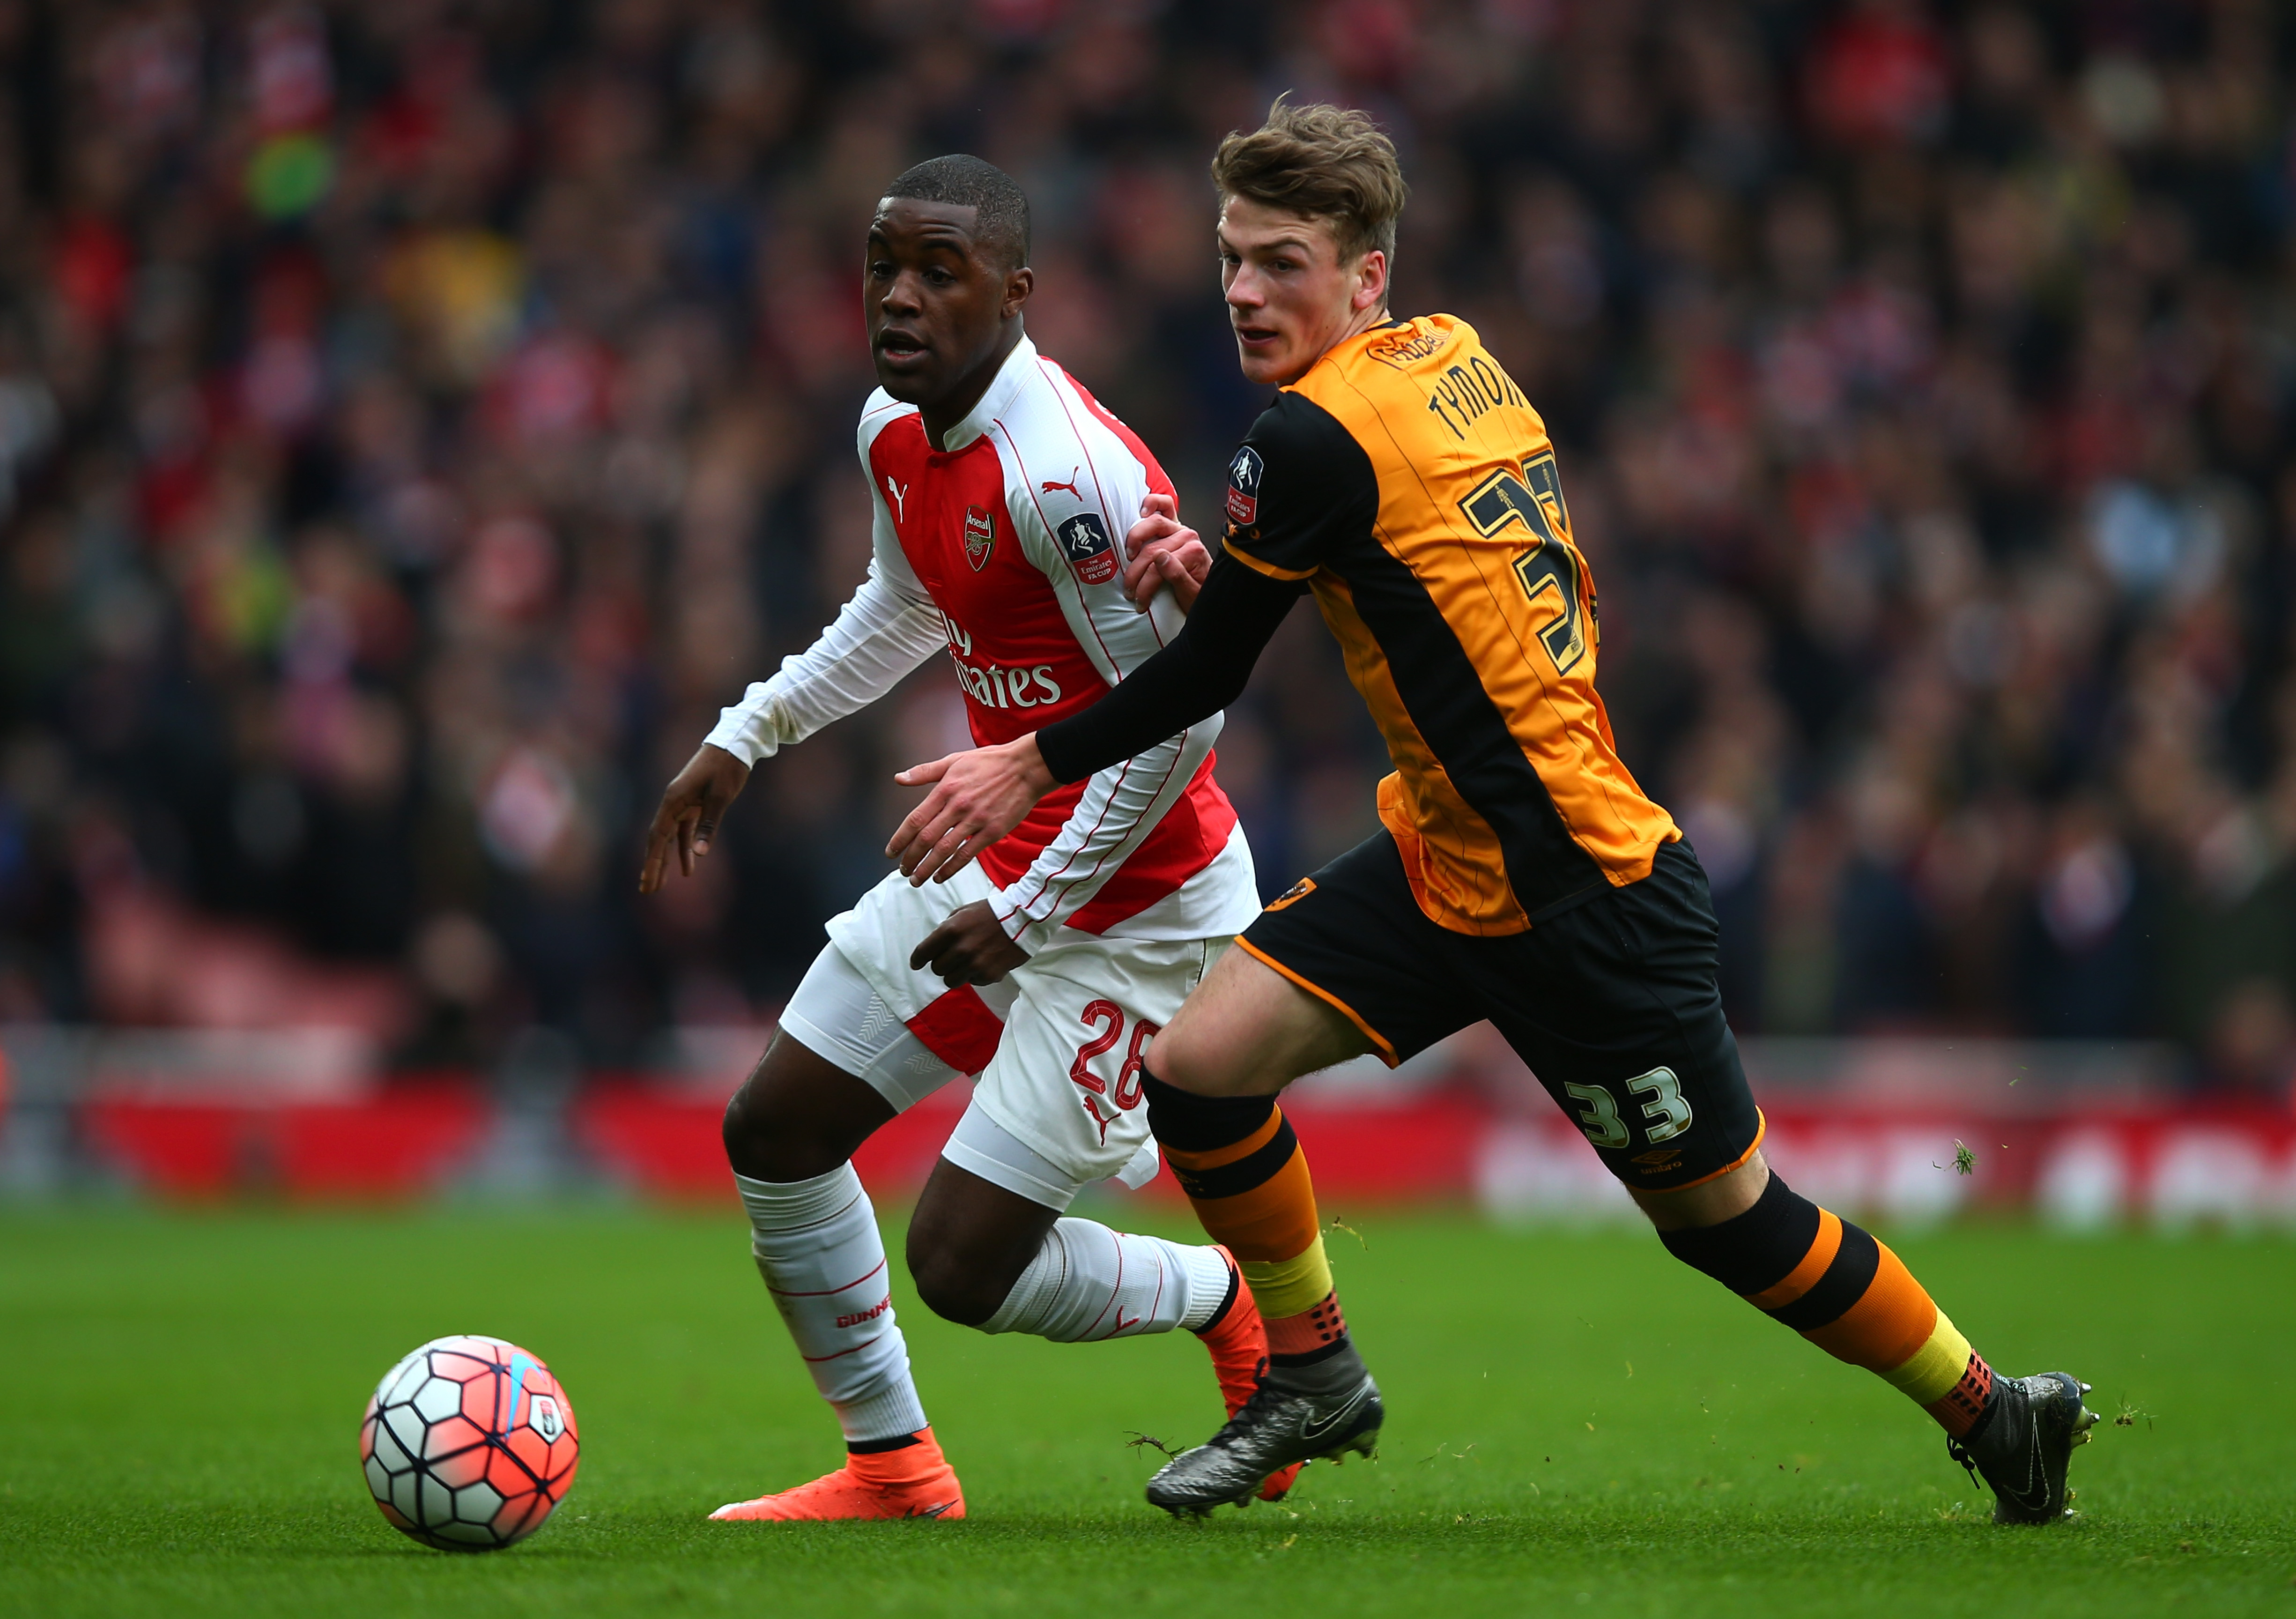 LONDON, ENGLAND - FEBRUARY 20:  Joel Campbell of Arsenal and Josh Tymon of Hull City compete for the ball during the Emirates FA Cup fifth round match between Arsenal and Hull City at the Emirates Stadium on February 20, 2016 in London, England.  (Photo by Clive Rose/Getty Images)